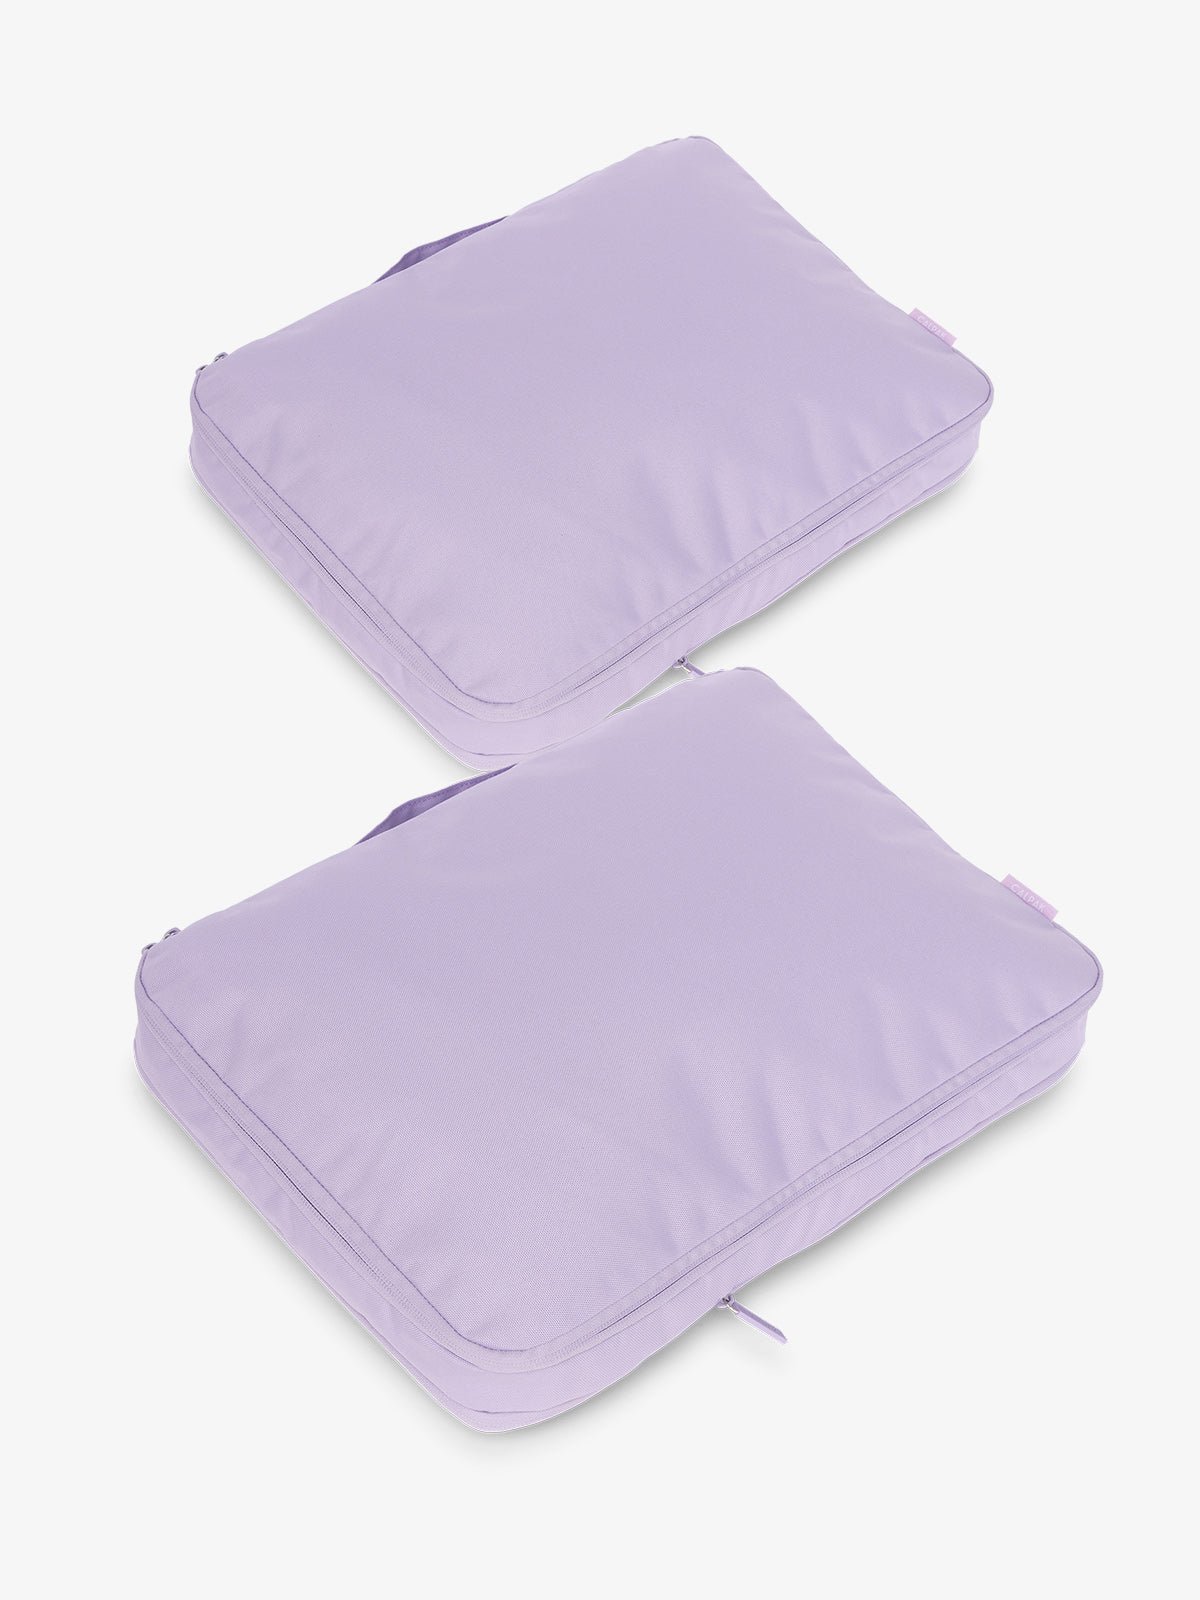 CALPAK Large Compression Packing Cubes in orchid